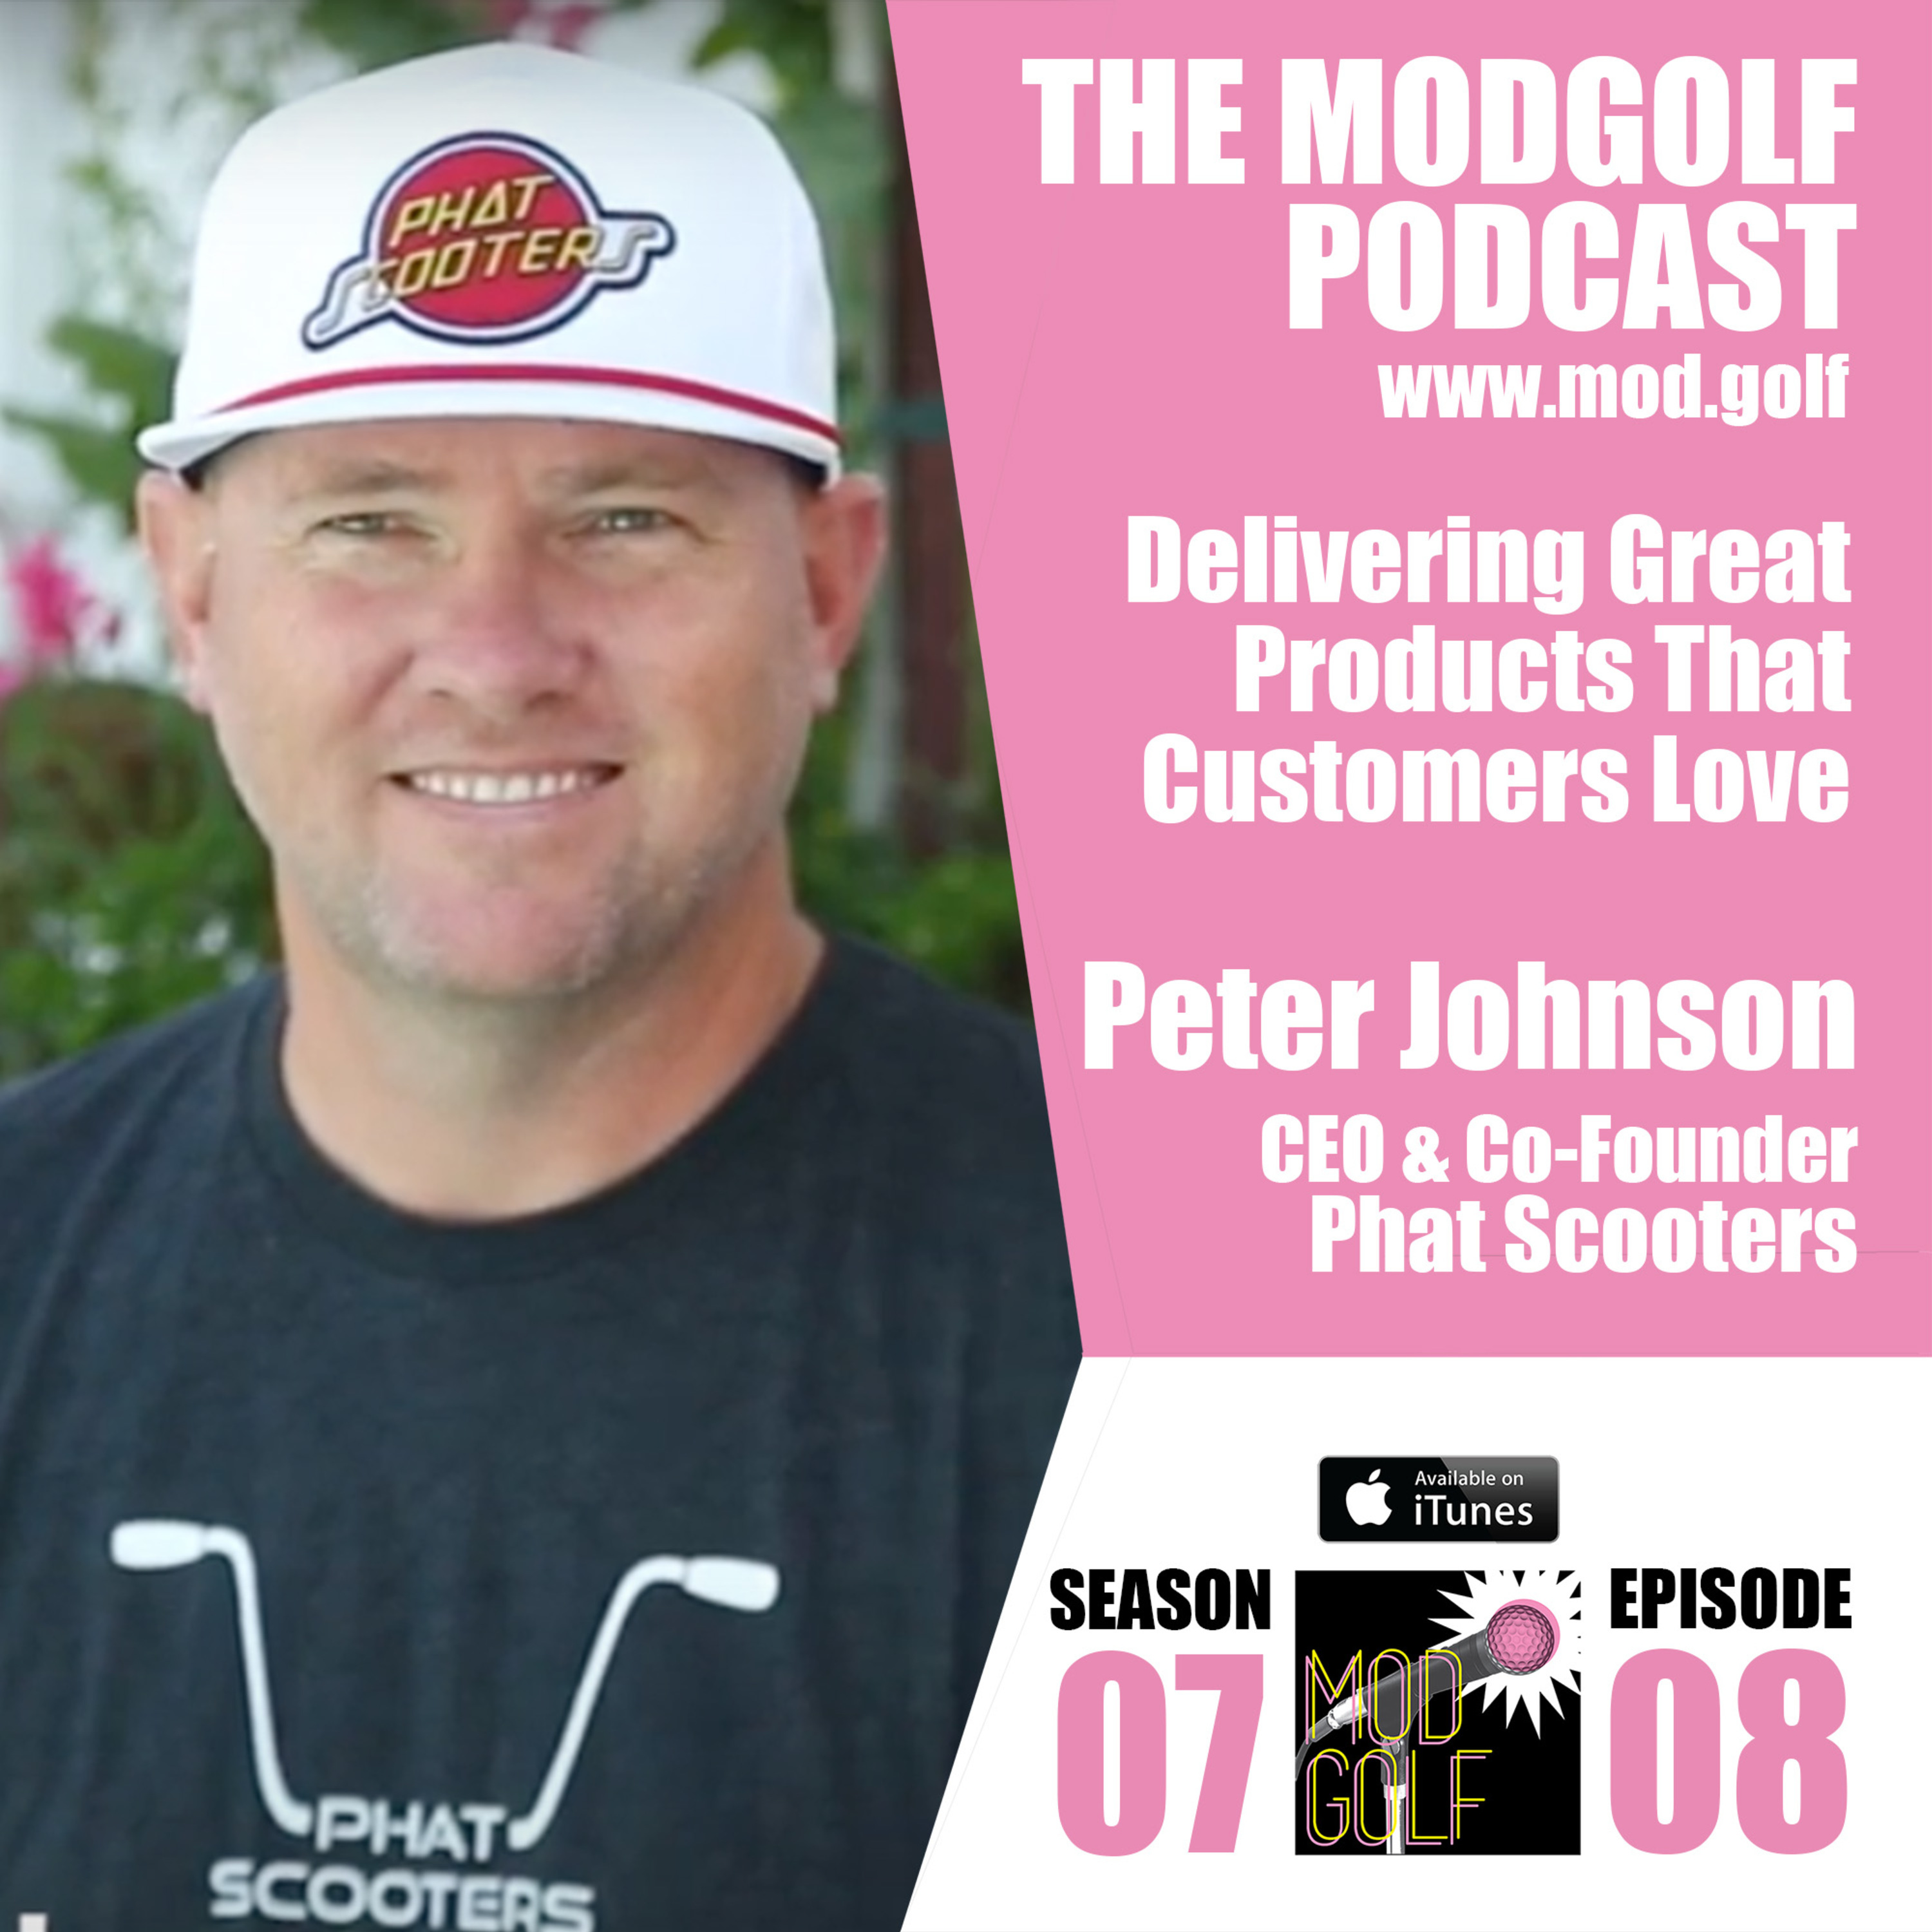 The ModGolf Podcast - Episodes Tagged with “lohla sport”